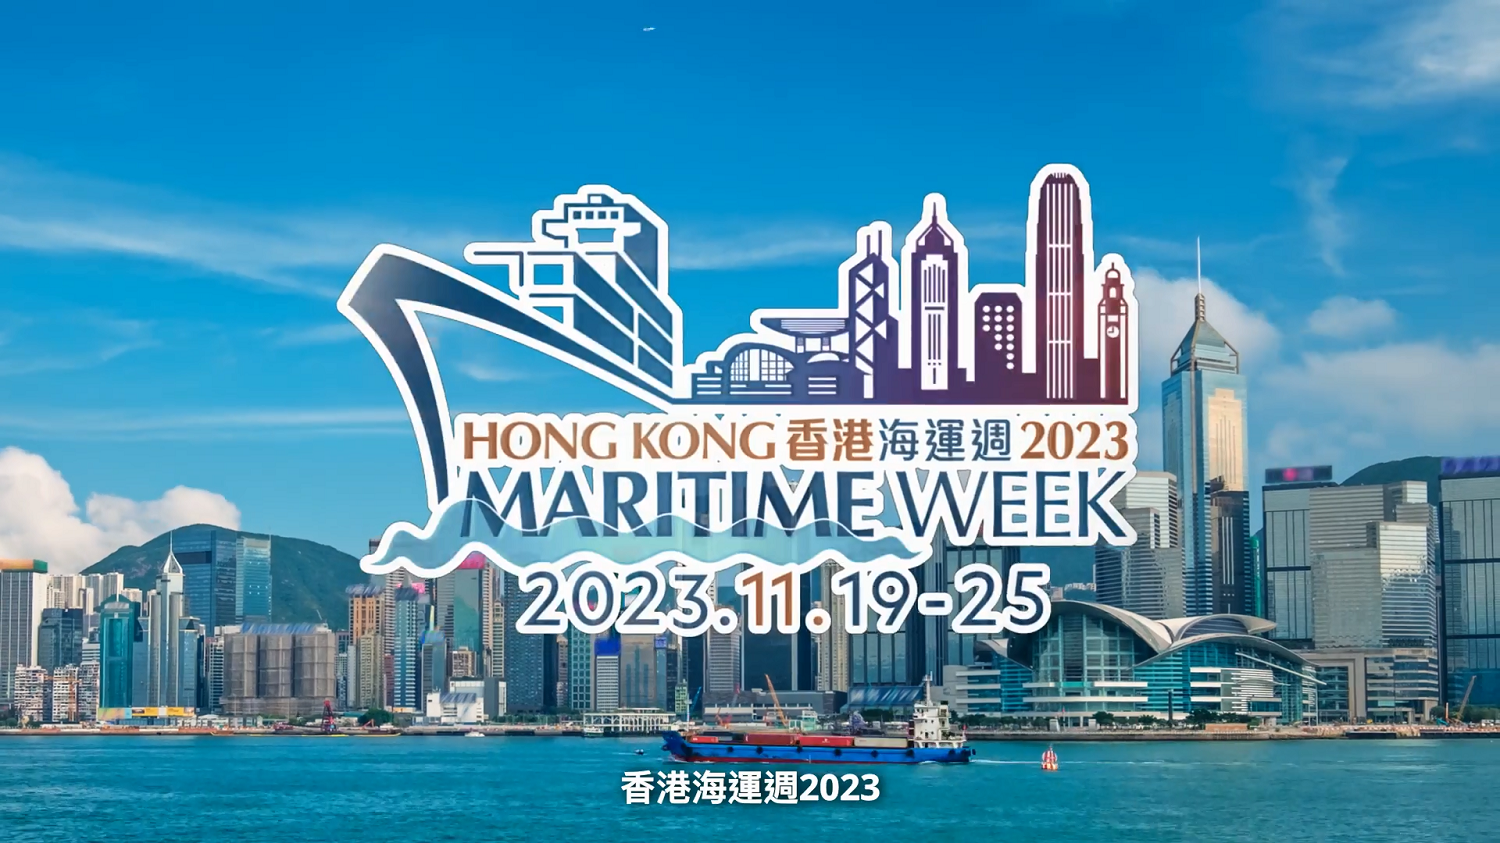 Hong Kong Maritime Week 2023 - Promotion Video (Chinese Only)